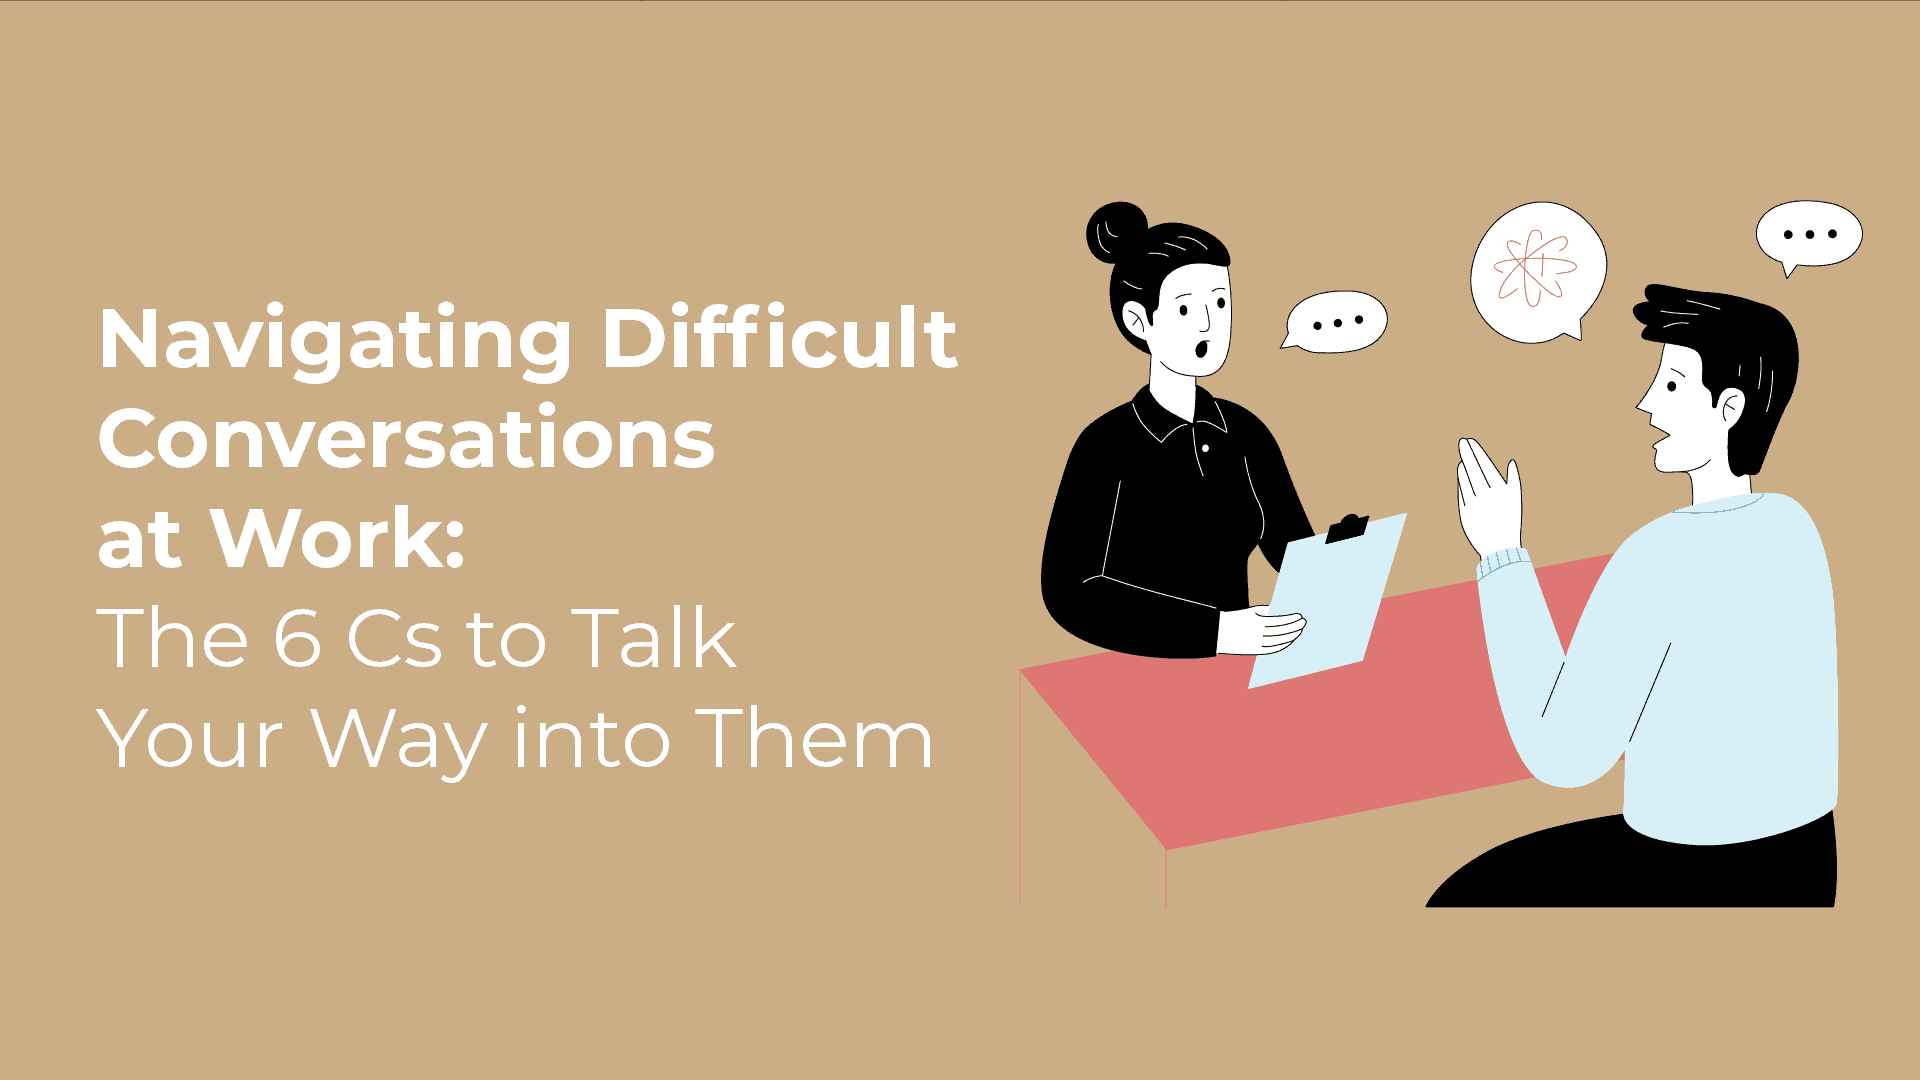 Navigating Difficult Conversations at Work: The 6 Cs to Talk Your Way into Them